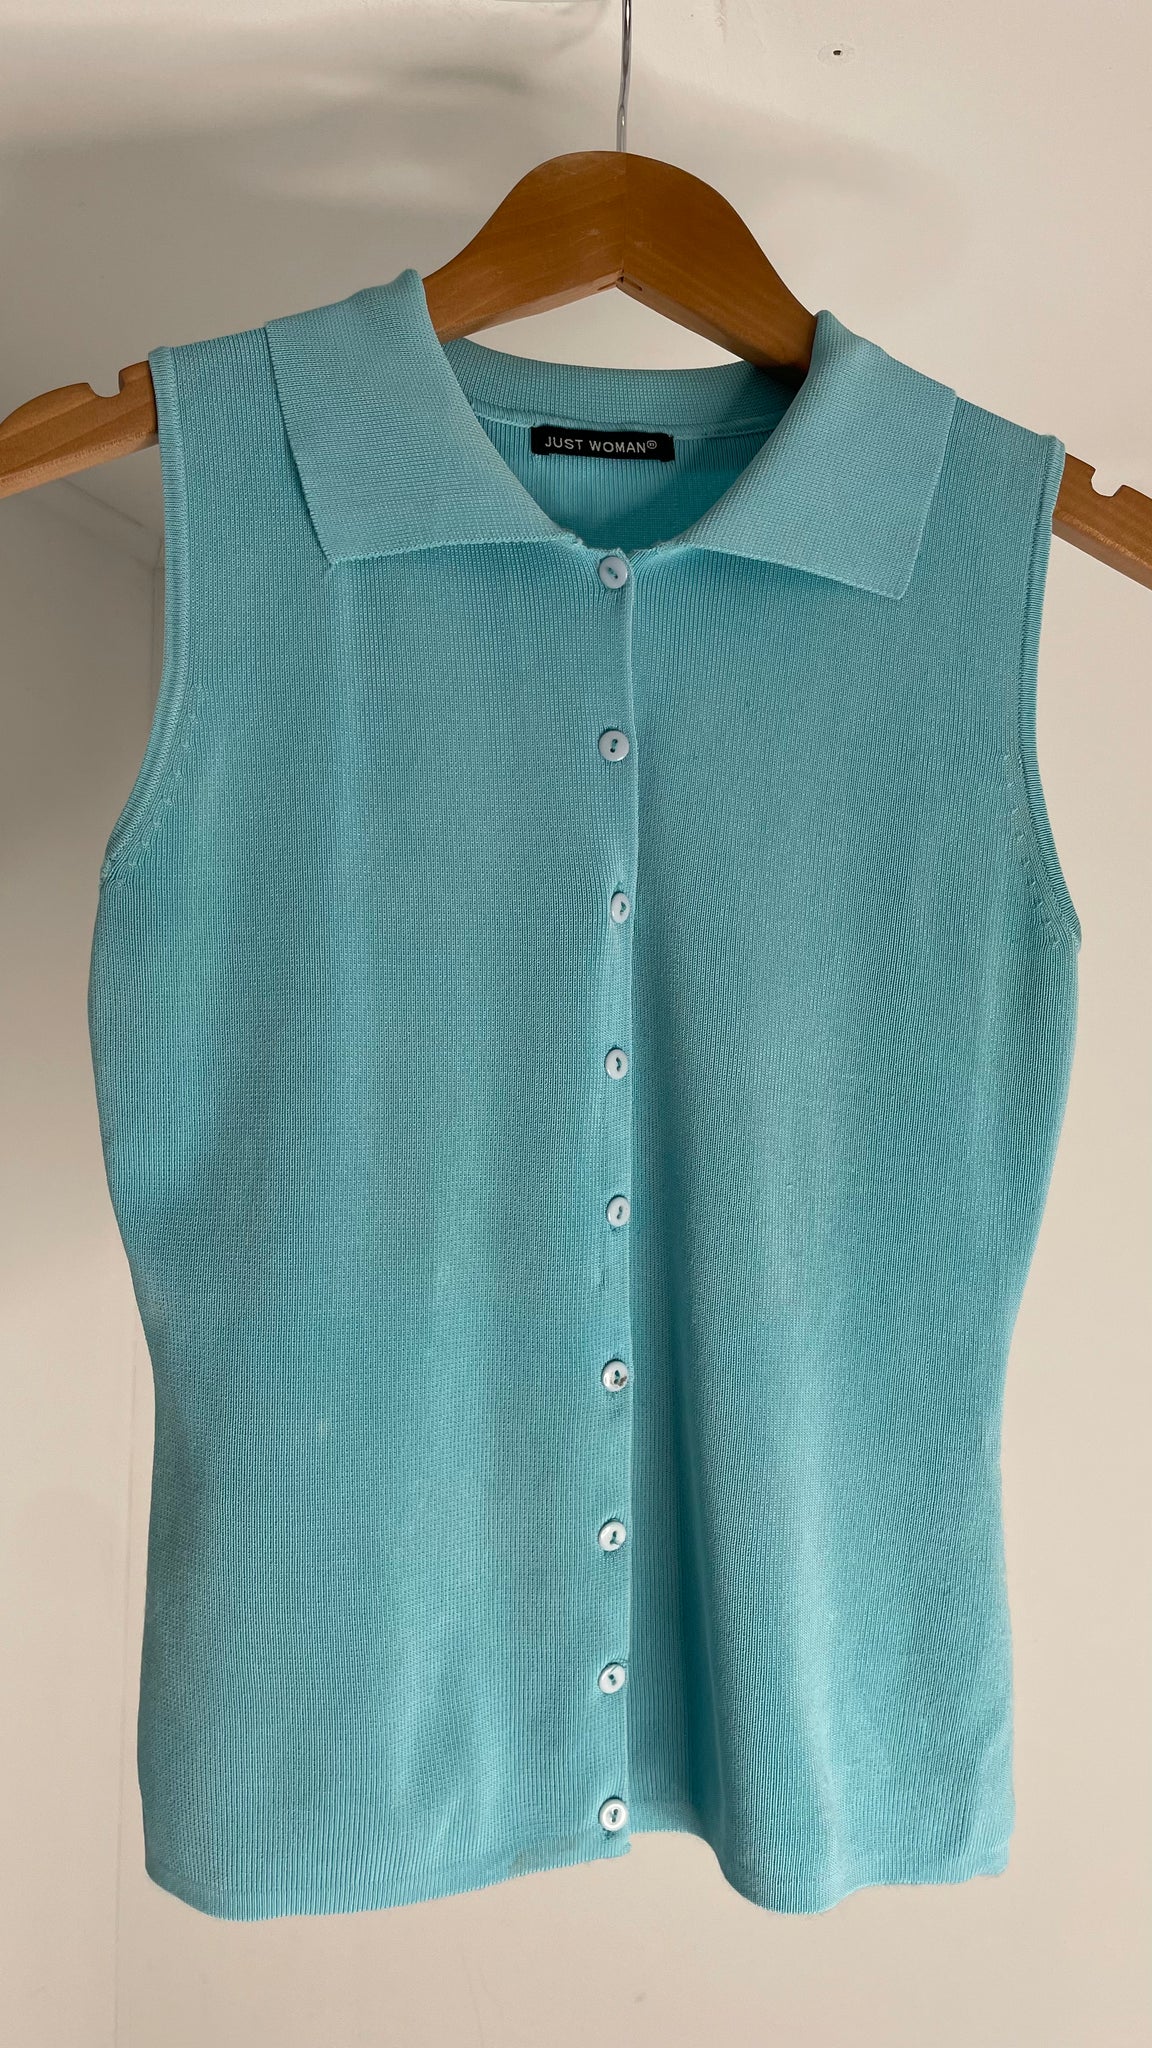 Turquoise Top S